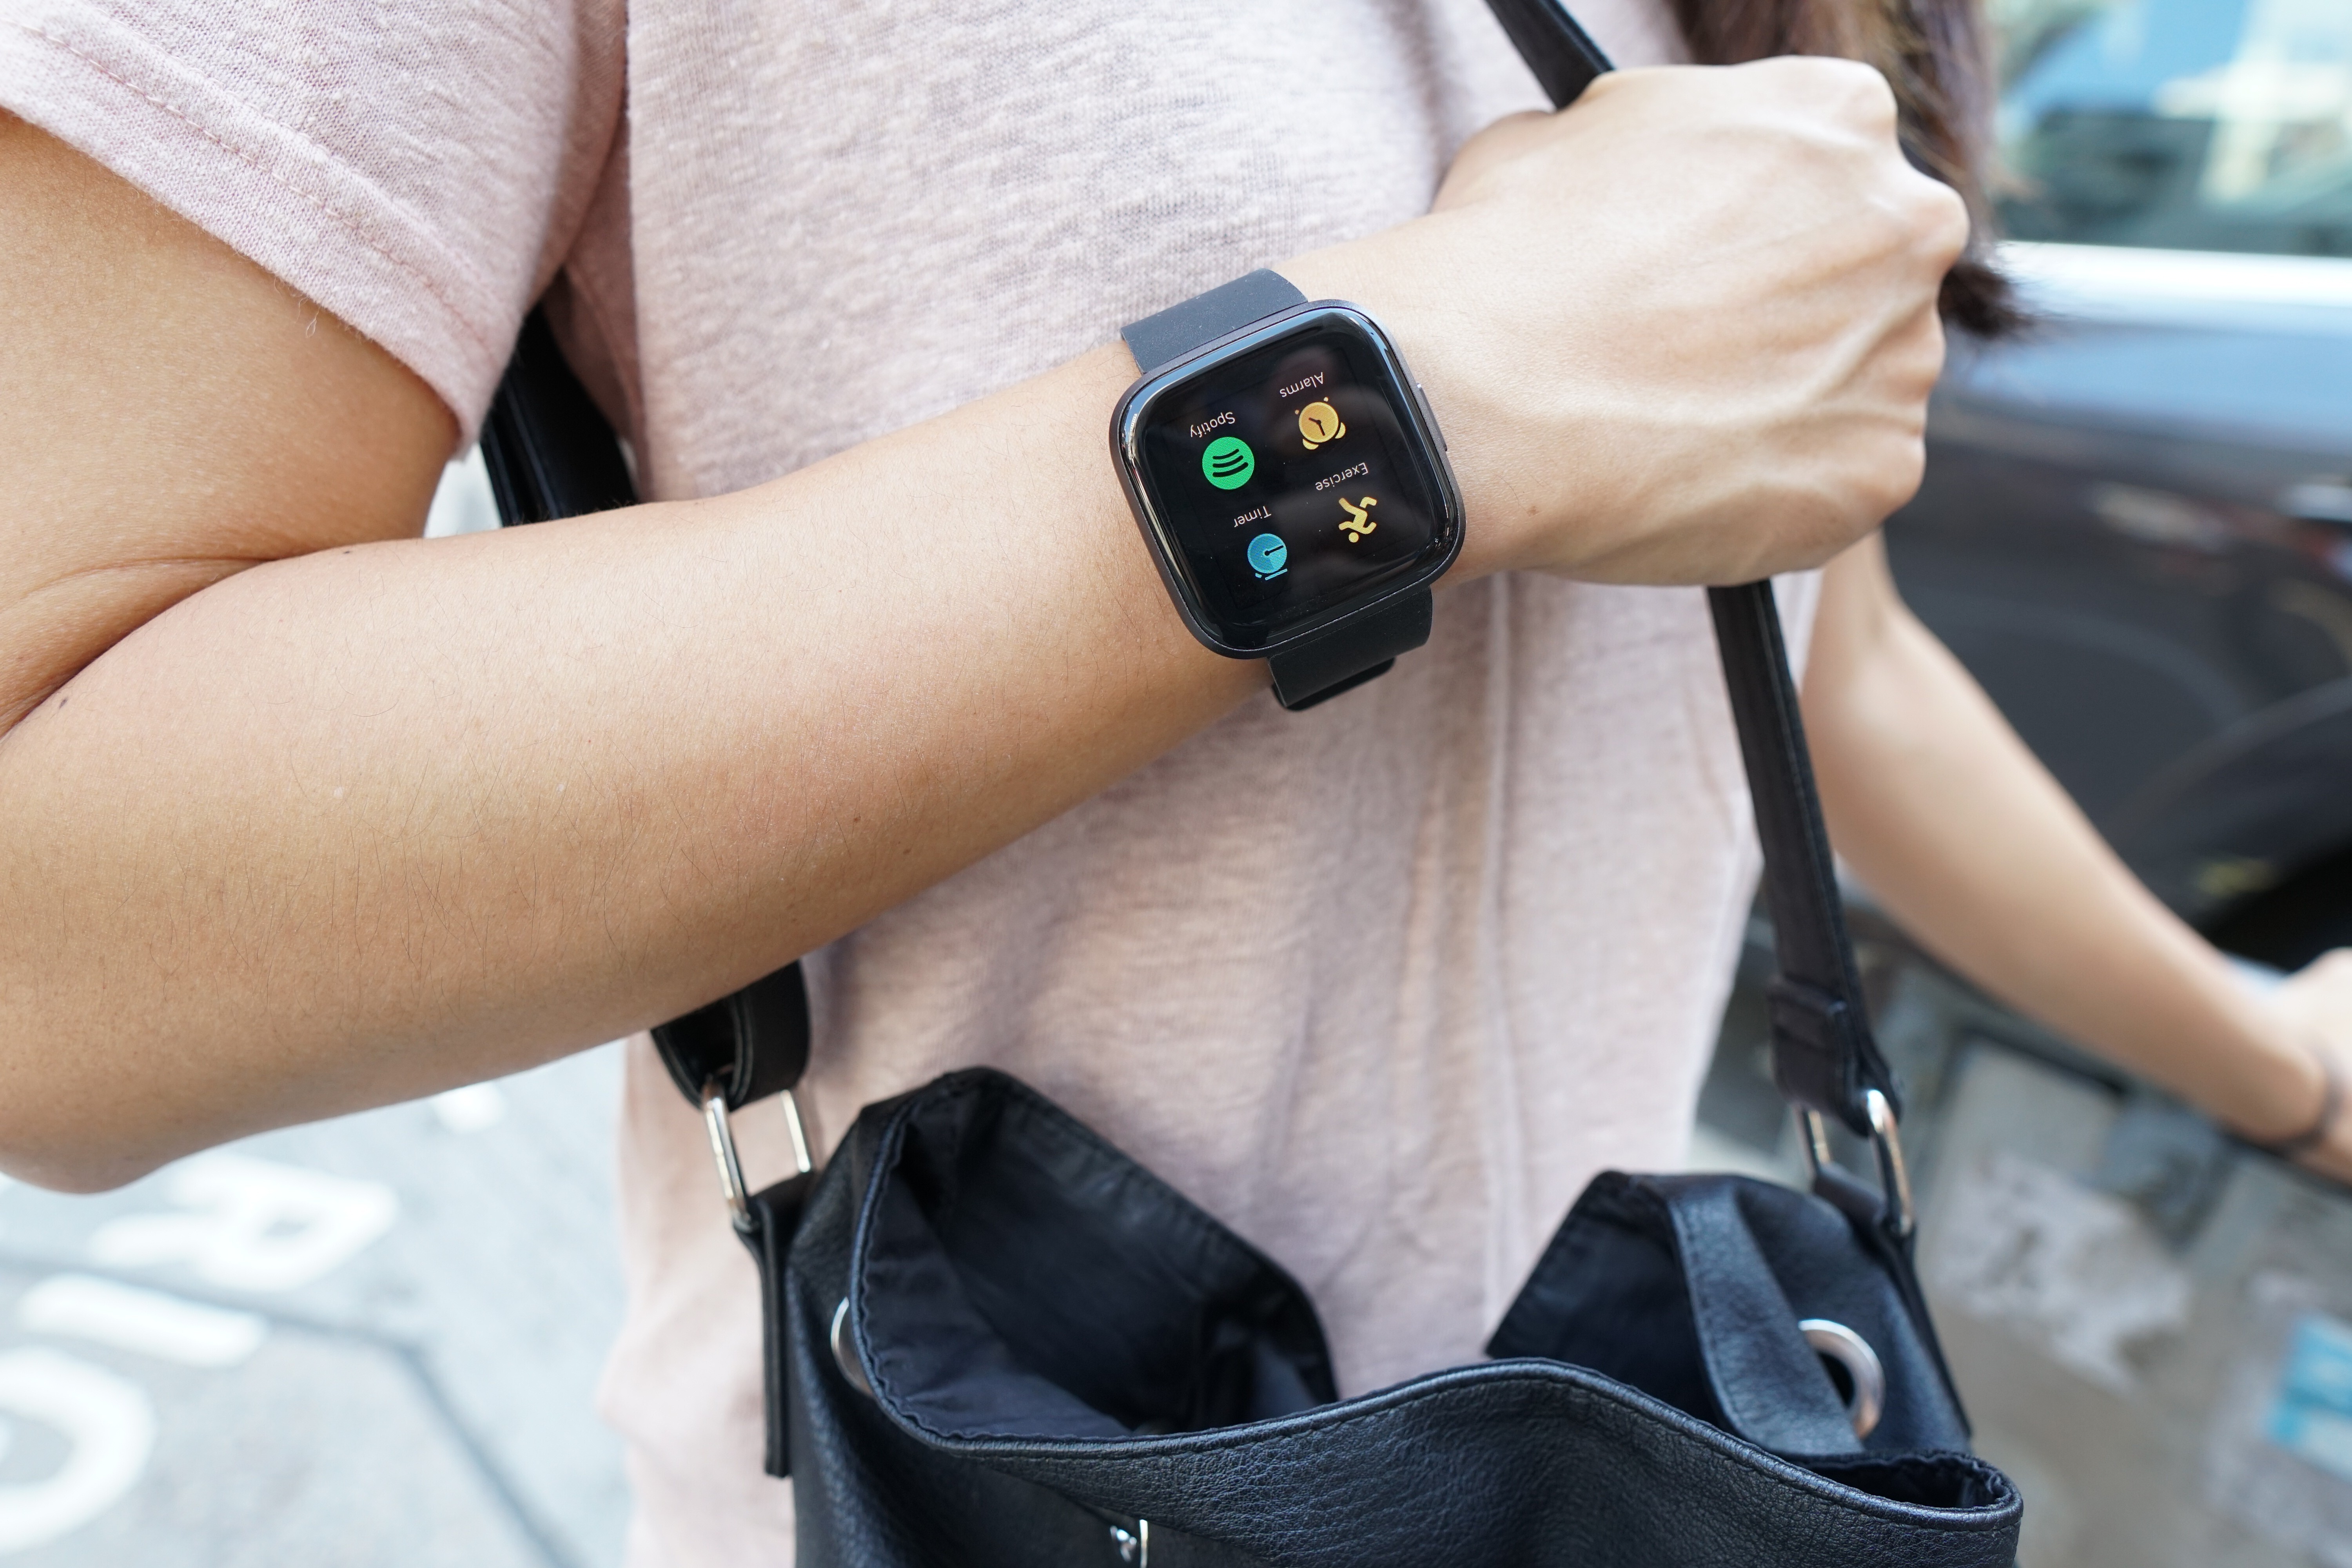 Hardware to detect irregular heartbeats is present on Fitbit devices such as the Versa 2 (pictured), but currently not available to consumers. Photo: Ben Sin